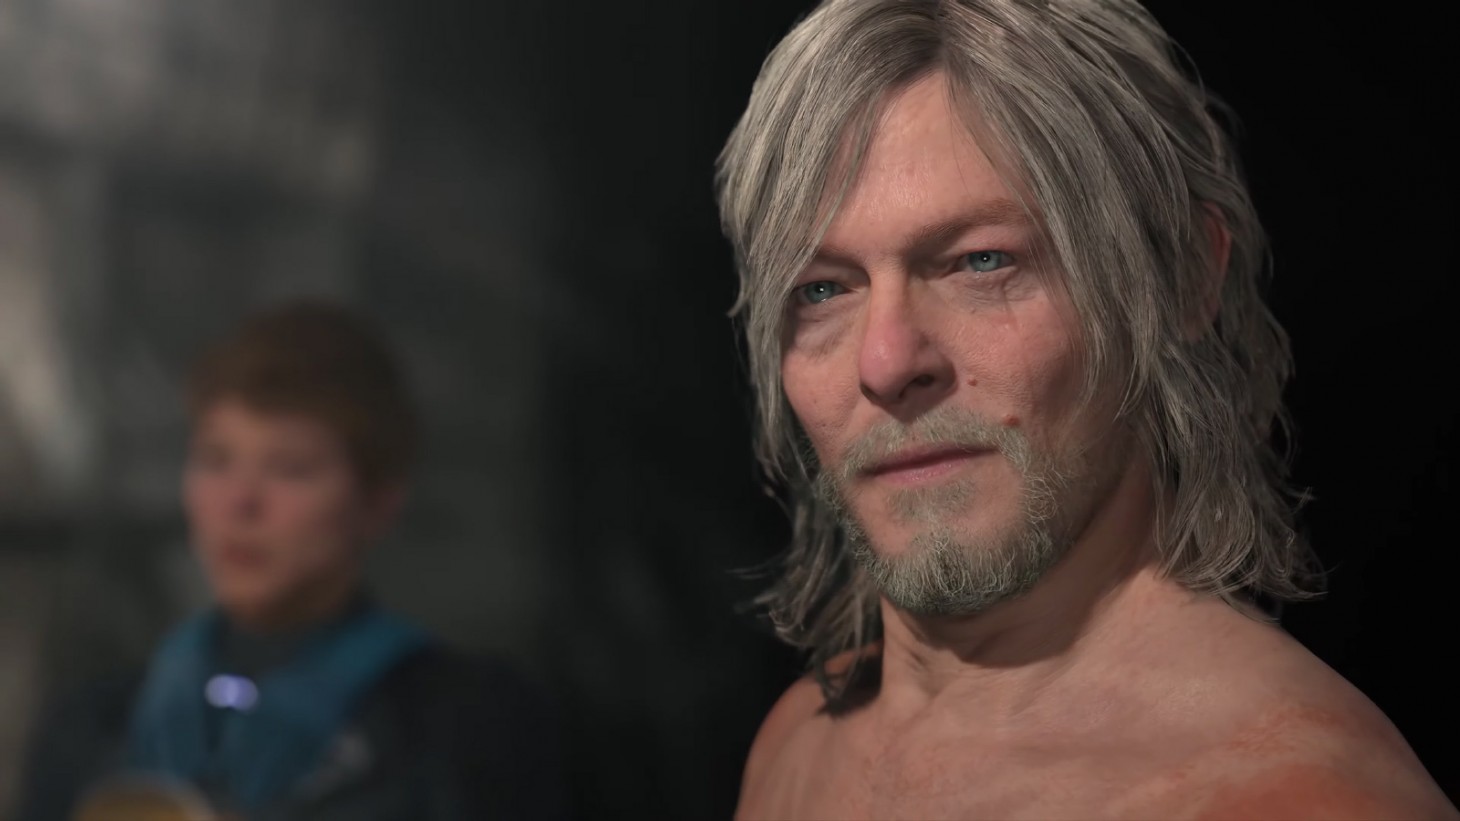 Death Stranding 2 Confirmed By Norman Reedus